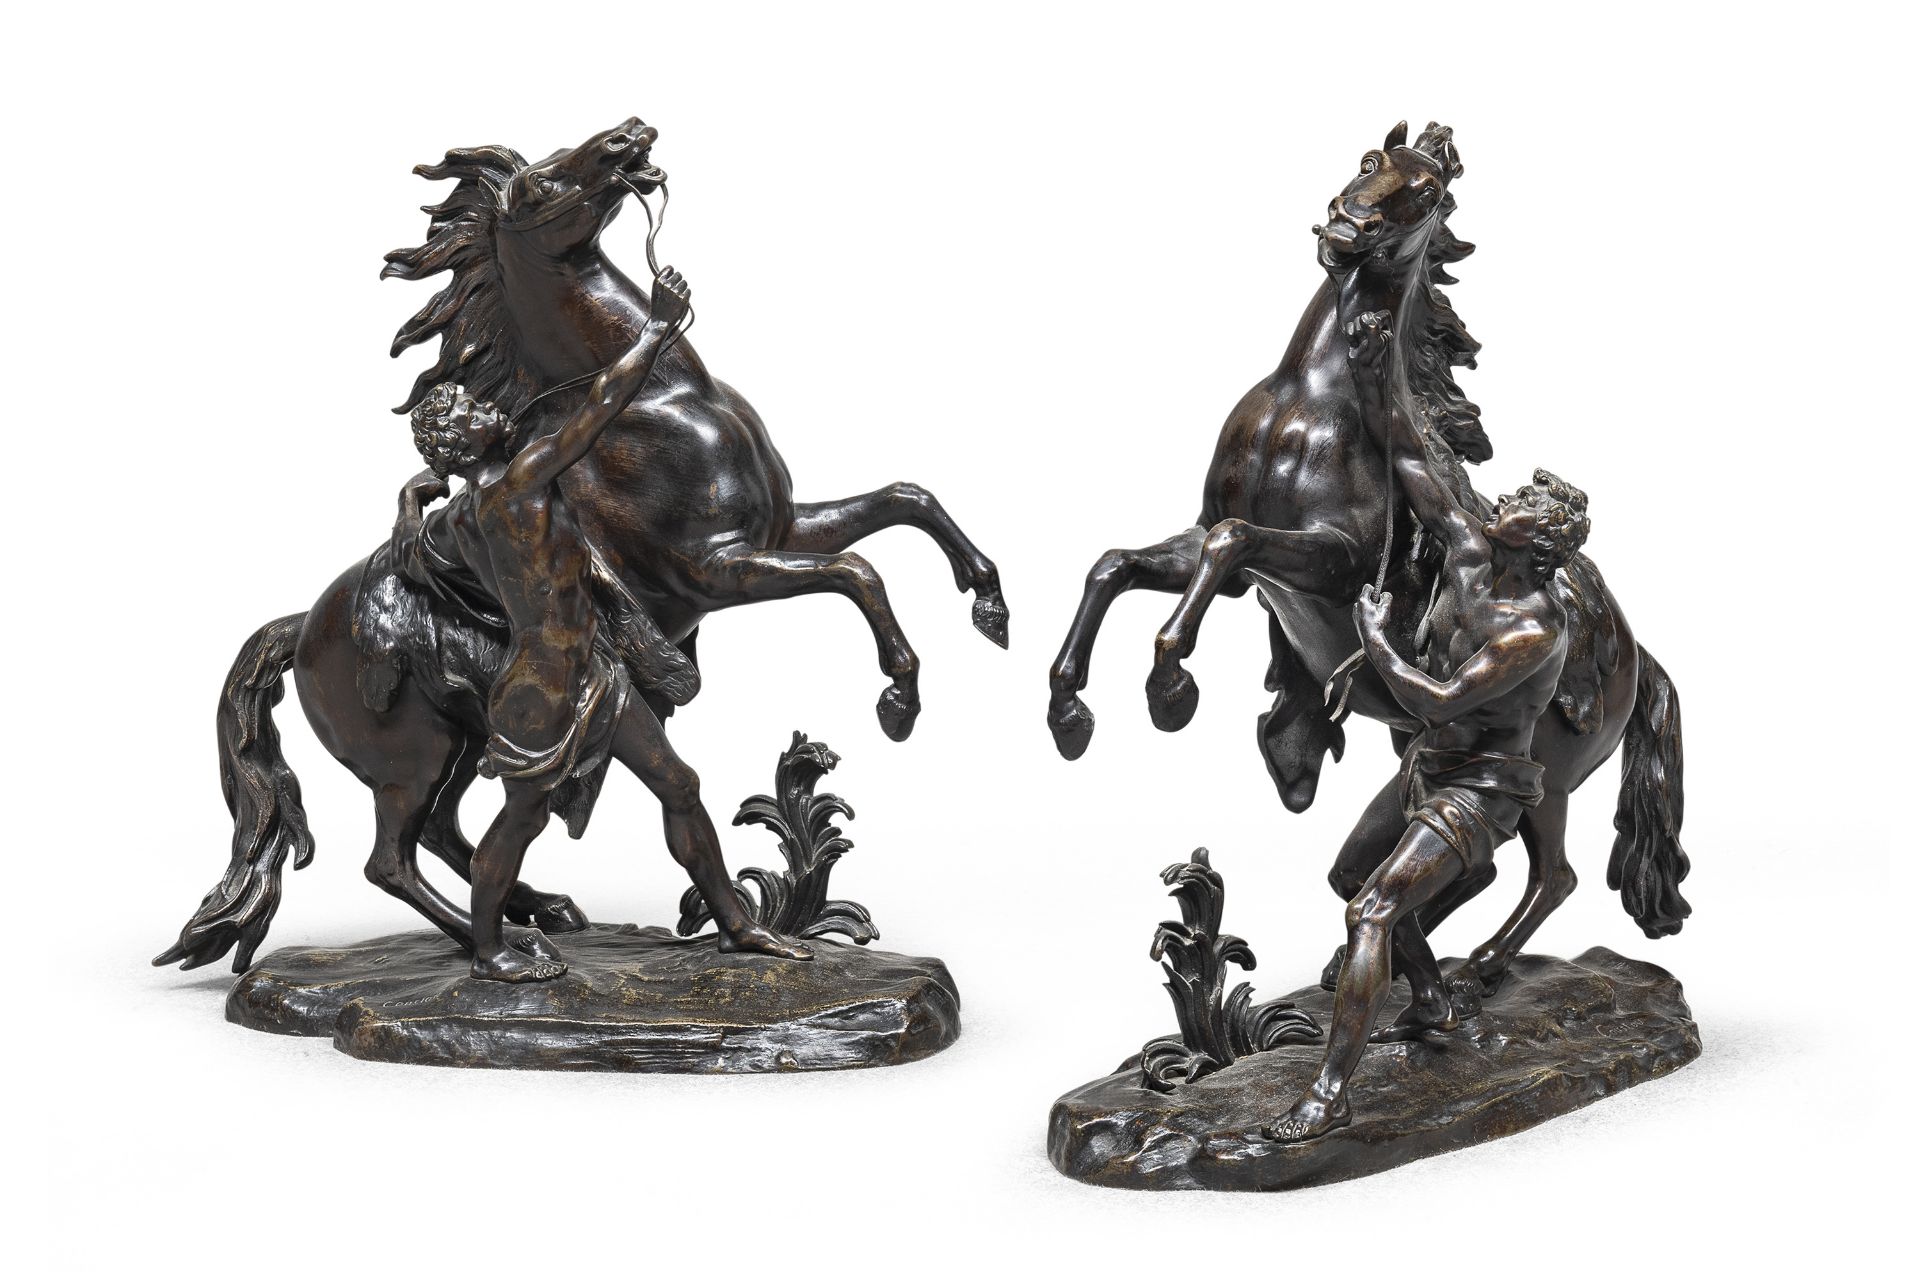 PAIR OF BRONZE SCULPTURES BY FOLLOWER OF GUILLAUME COUSTOU